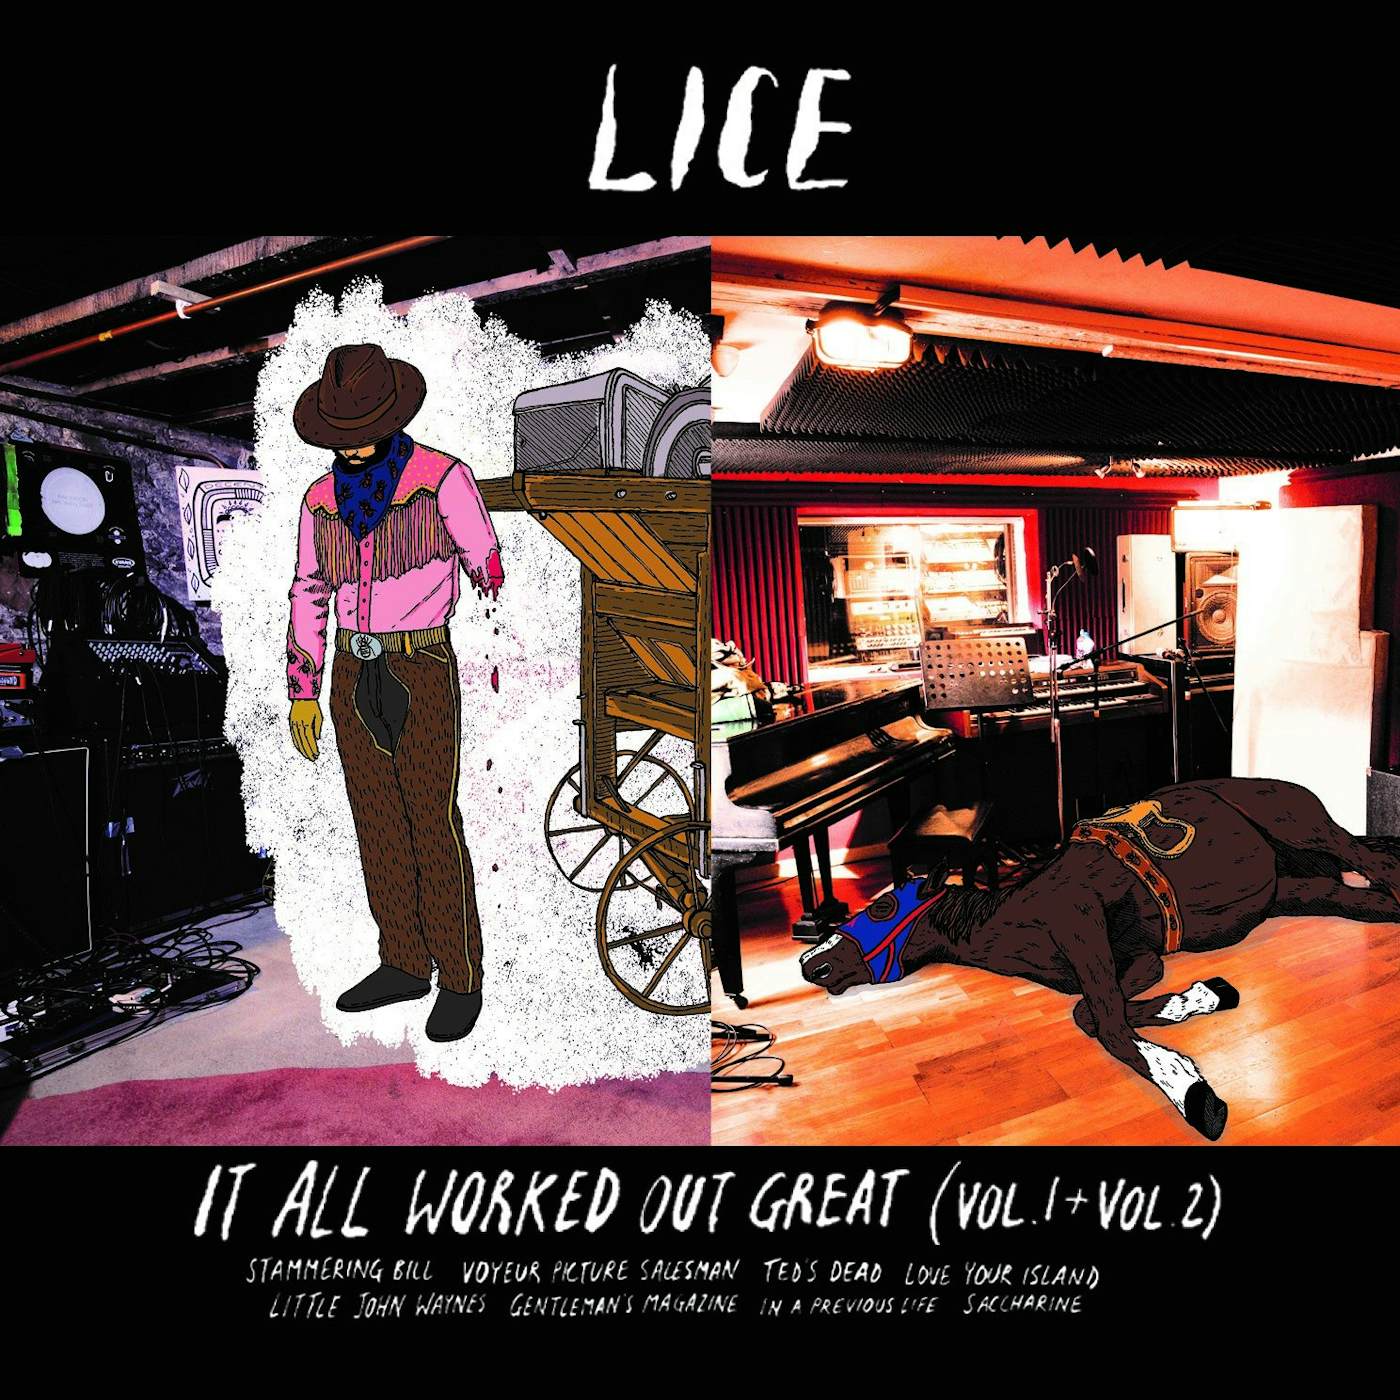 Lice 'It All Worked Out Great' Vinyl Record